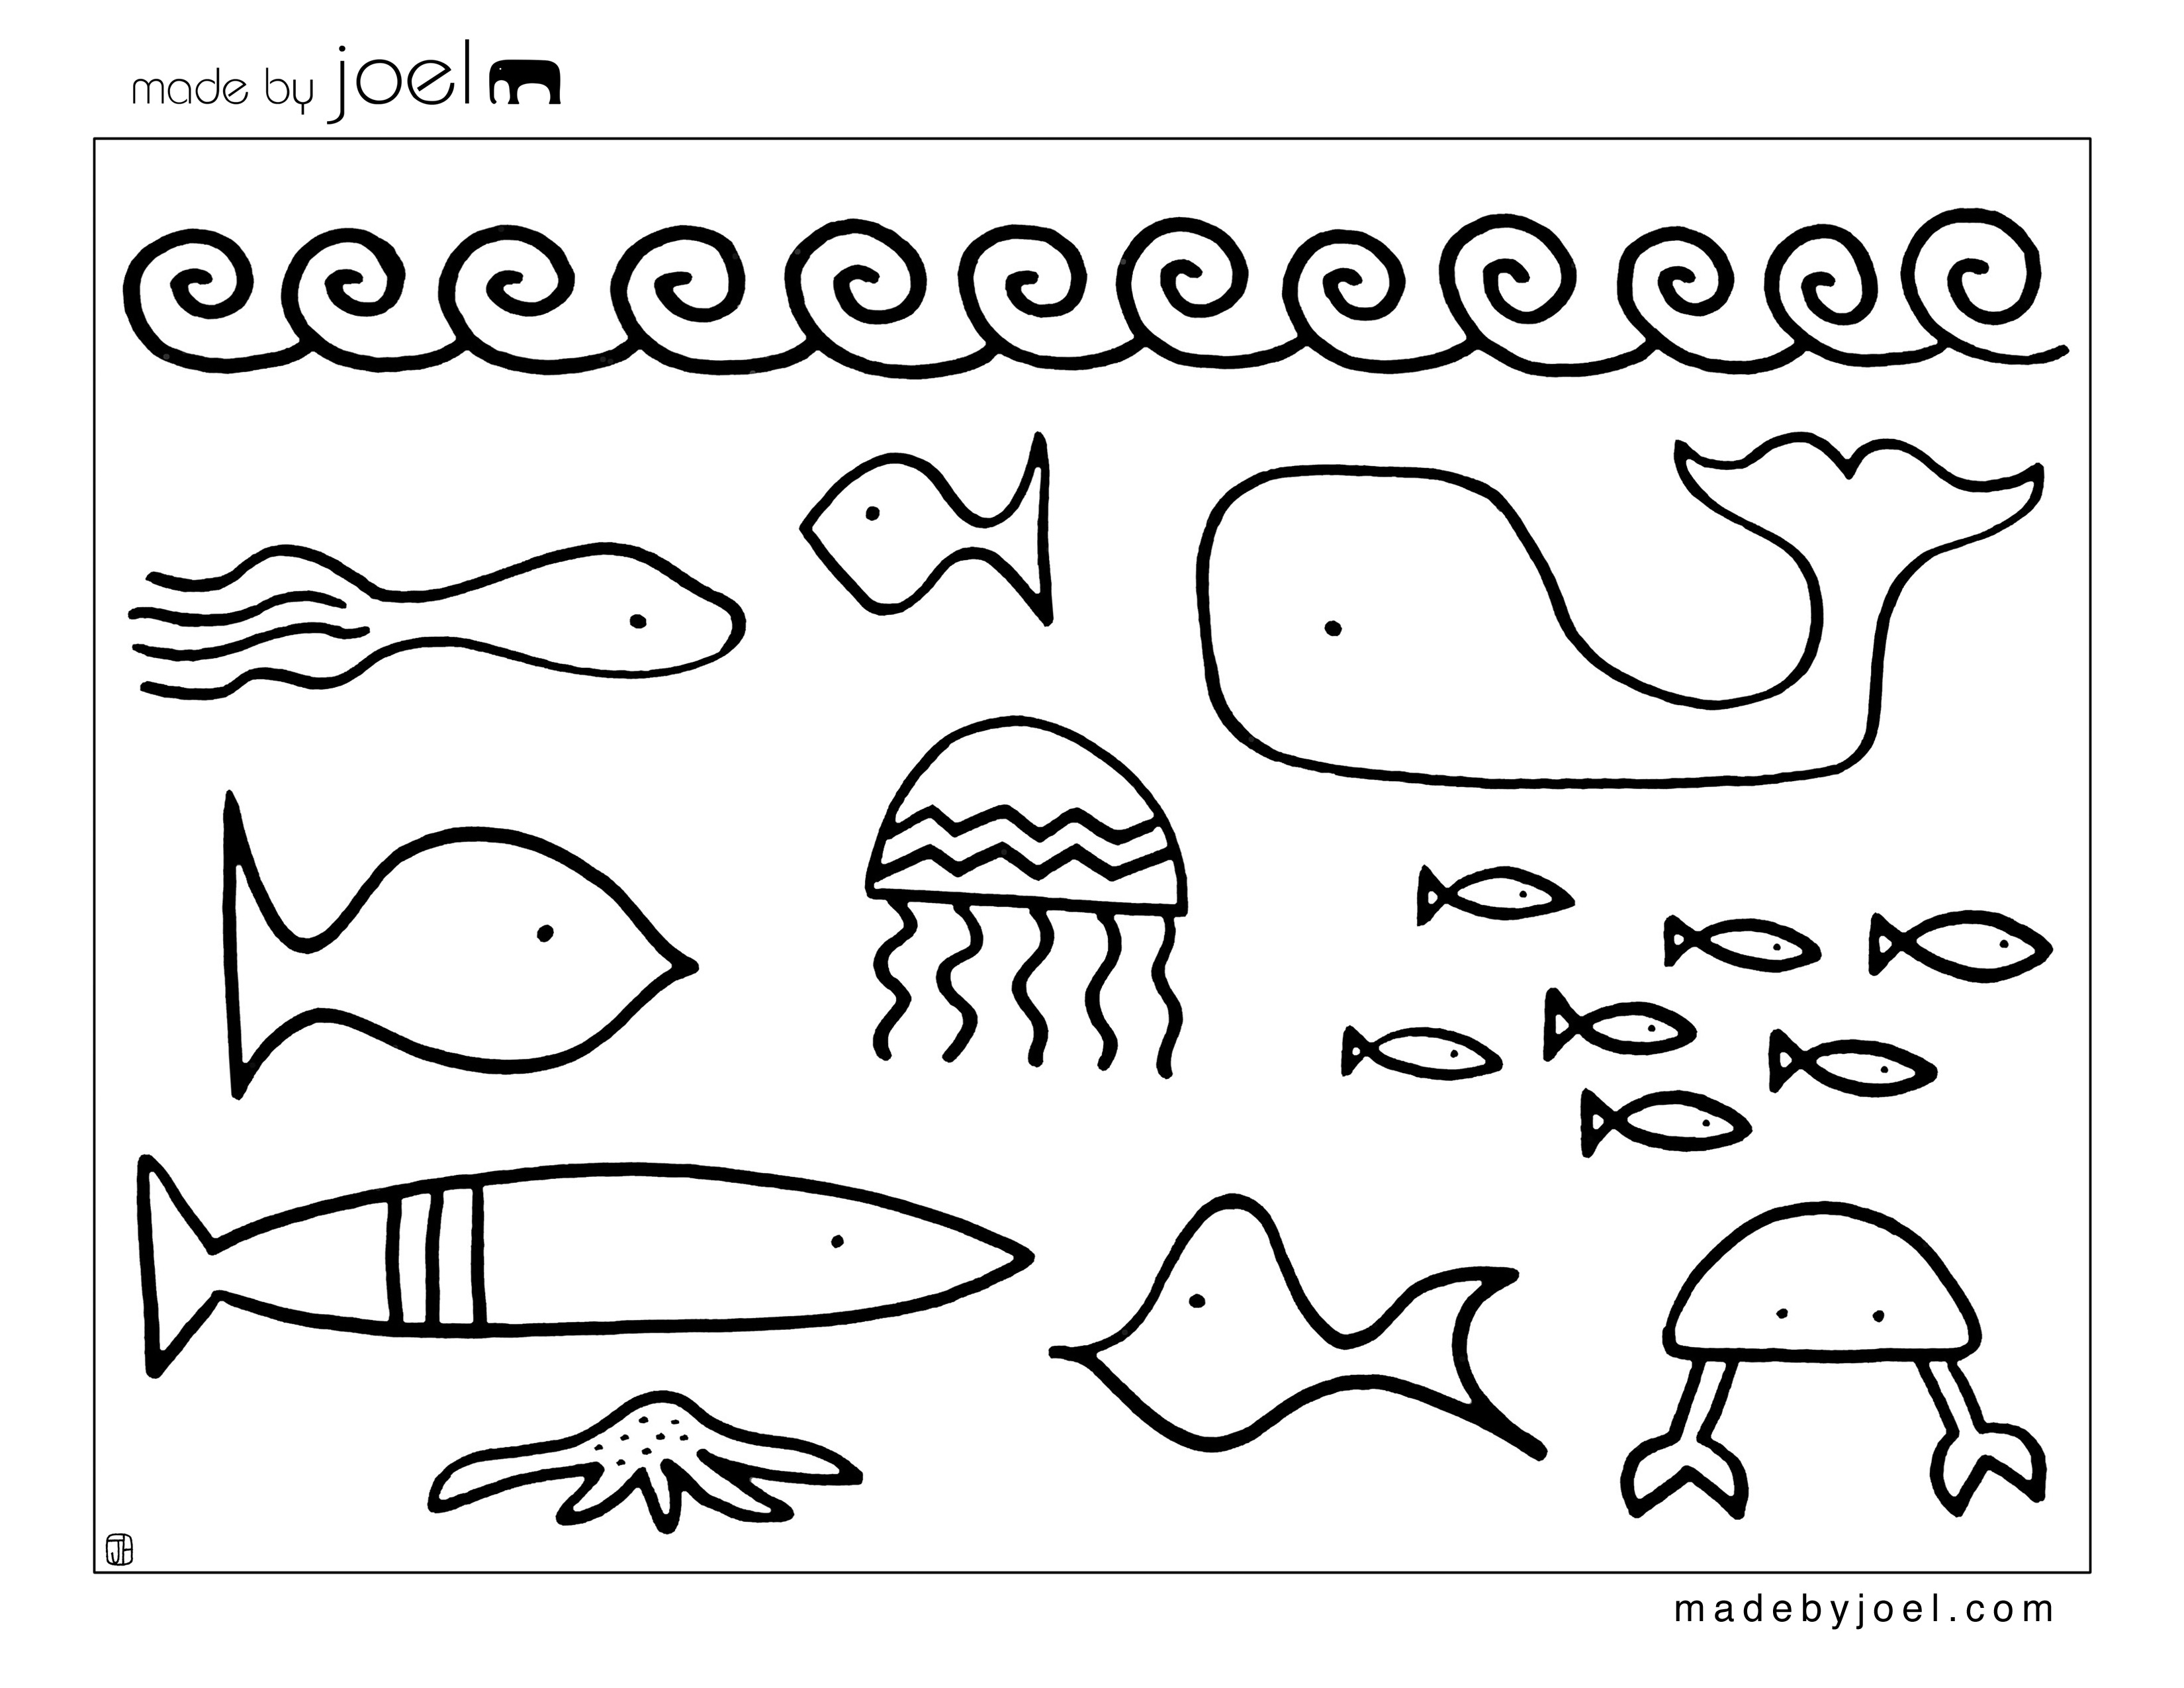 Free coloring sheets â page â made by joel